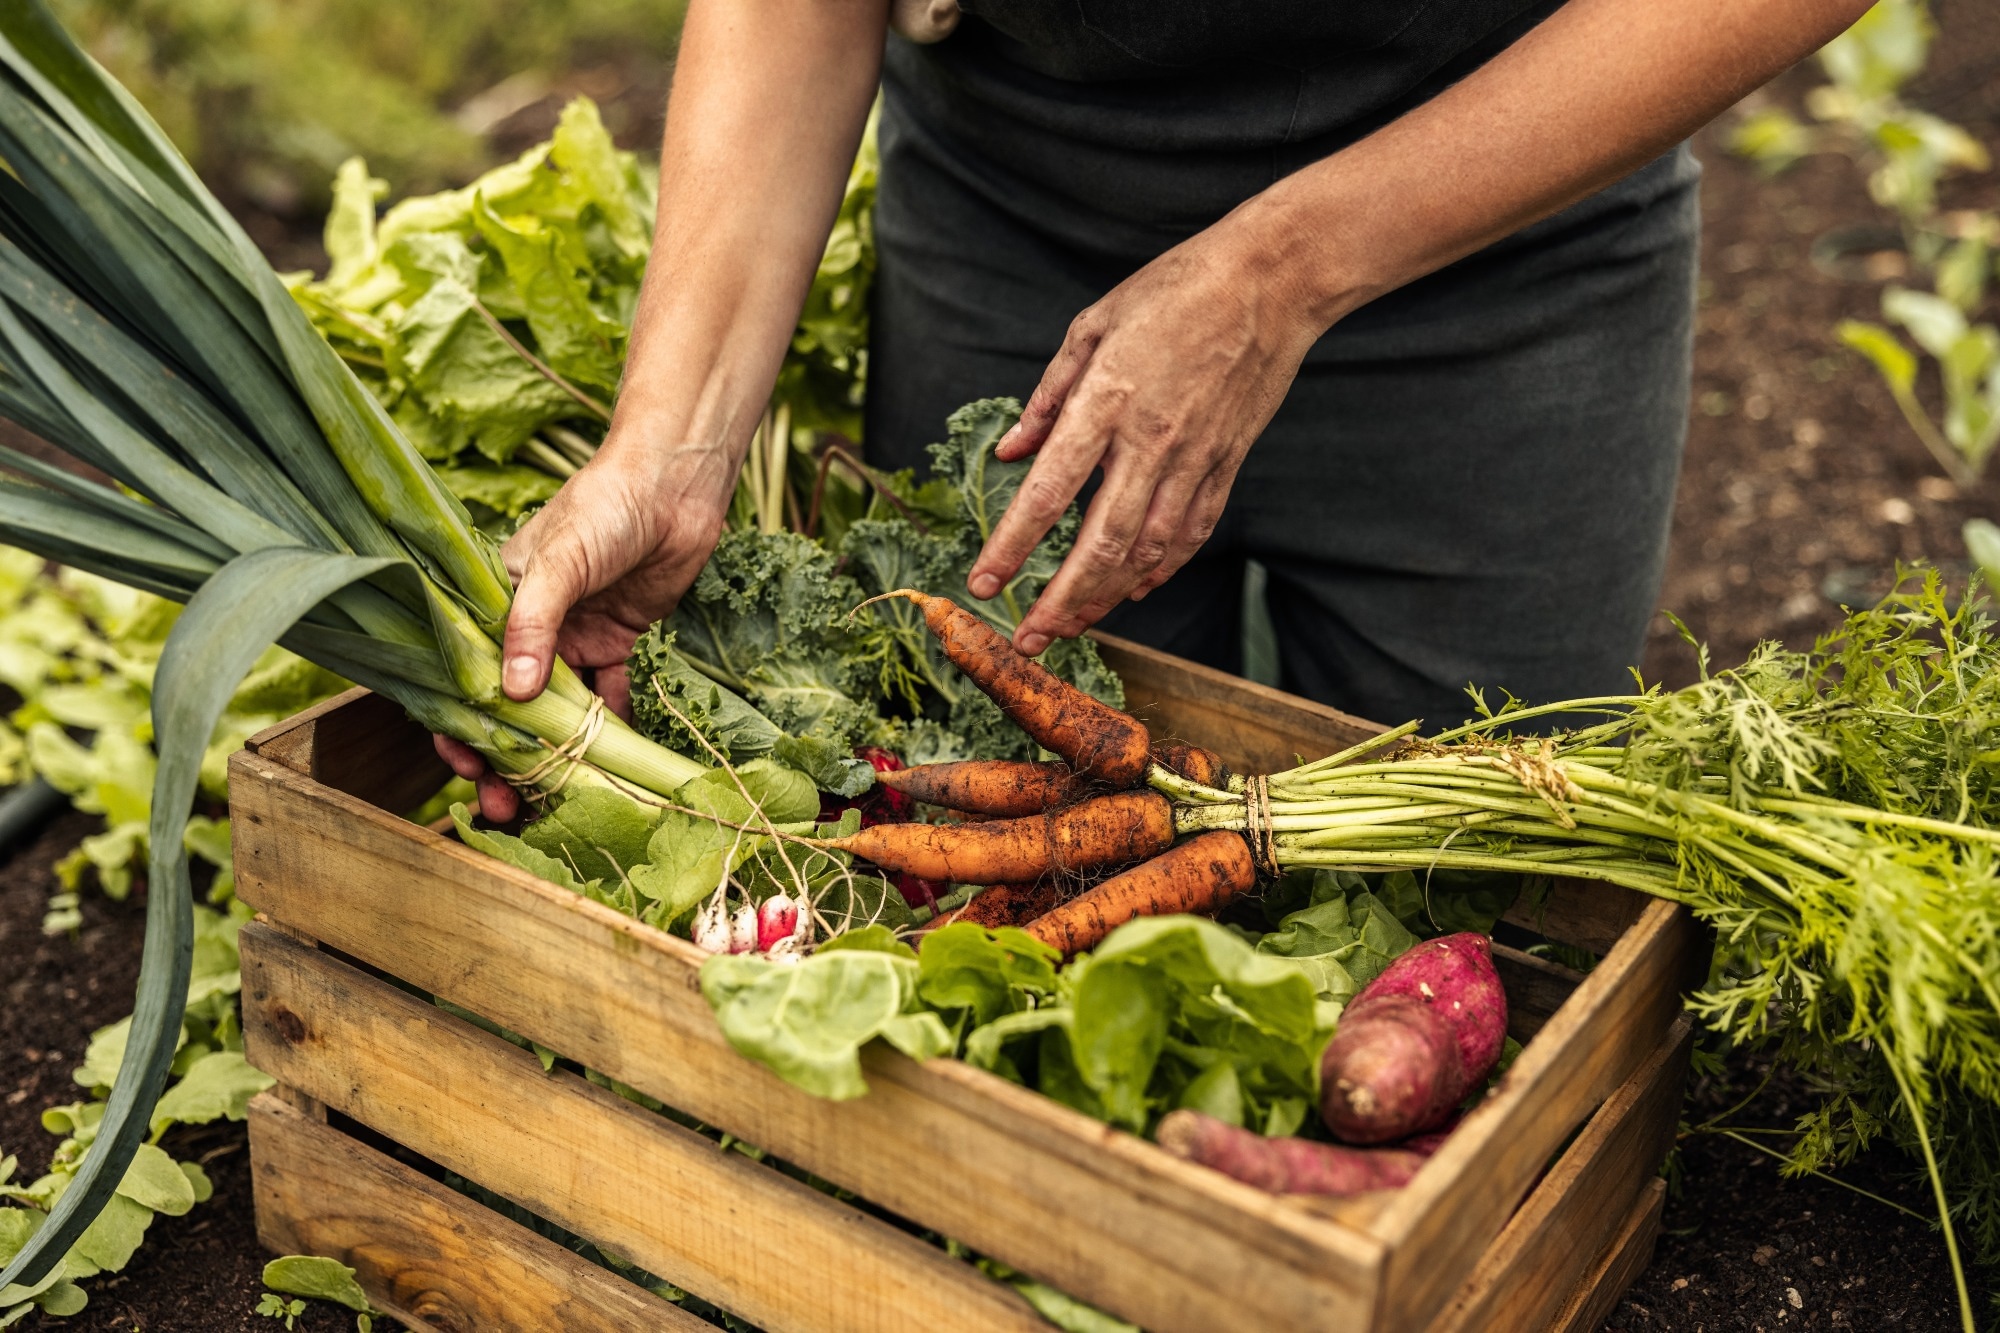 Study: Simple dietary substitutions can reduce carbon footprints and improve dietary quality across diverse segments of the US population. Image Credit: Jacob Lund/Shutterstock.com